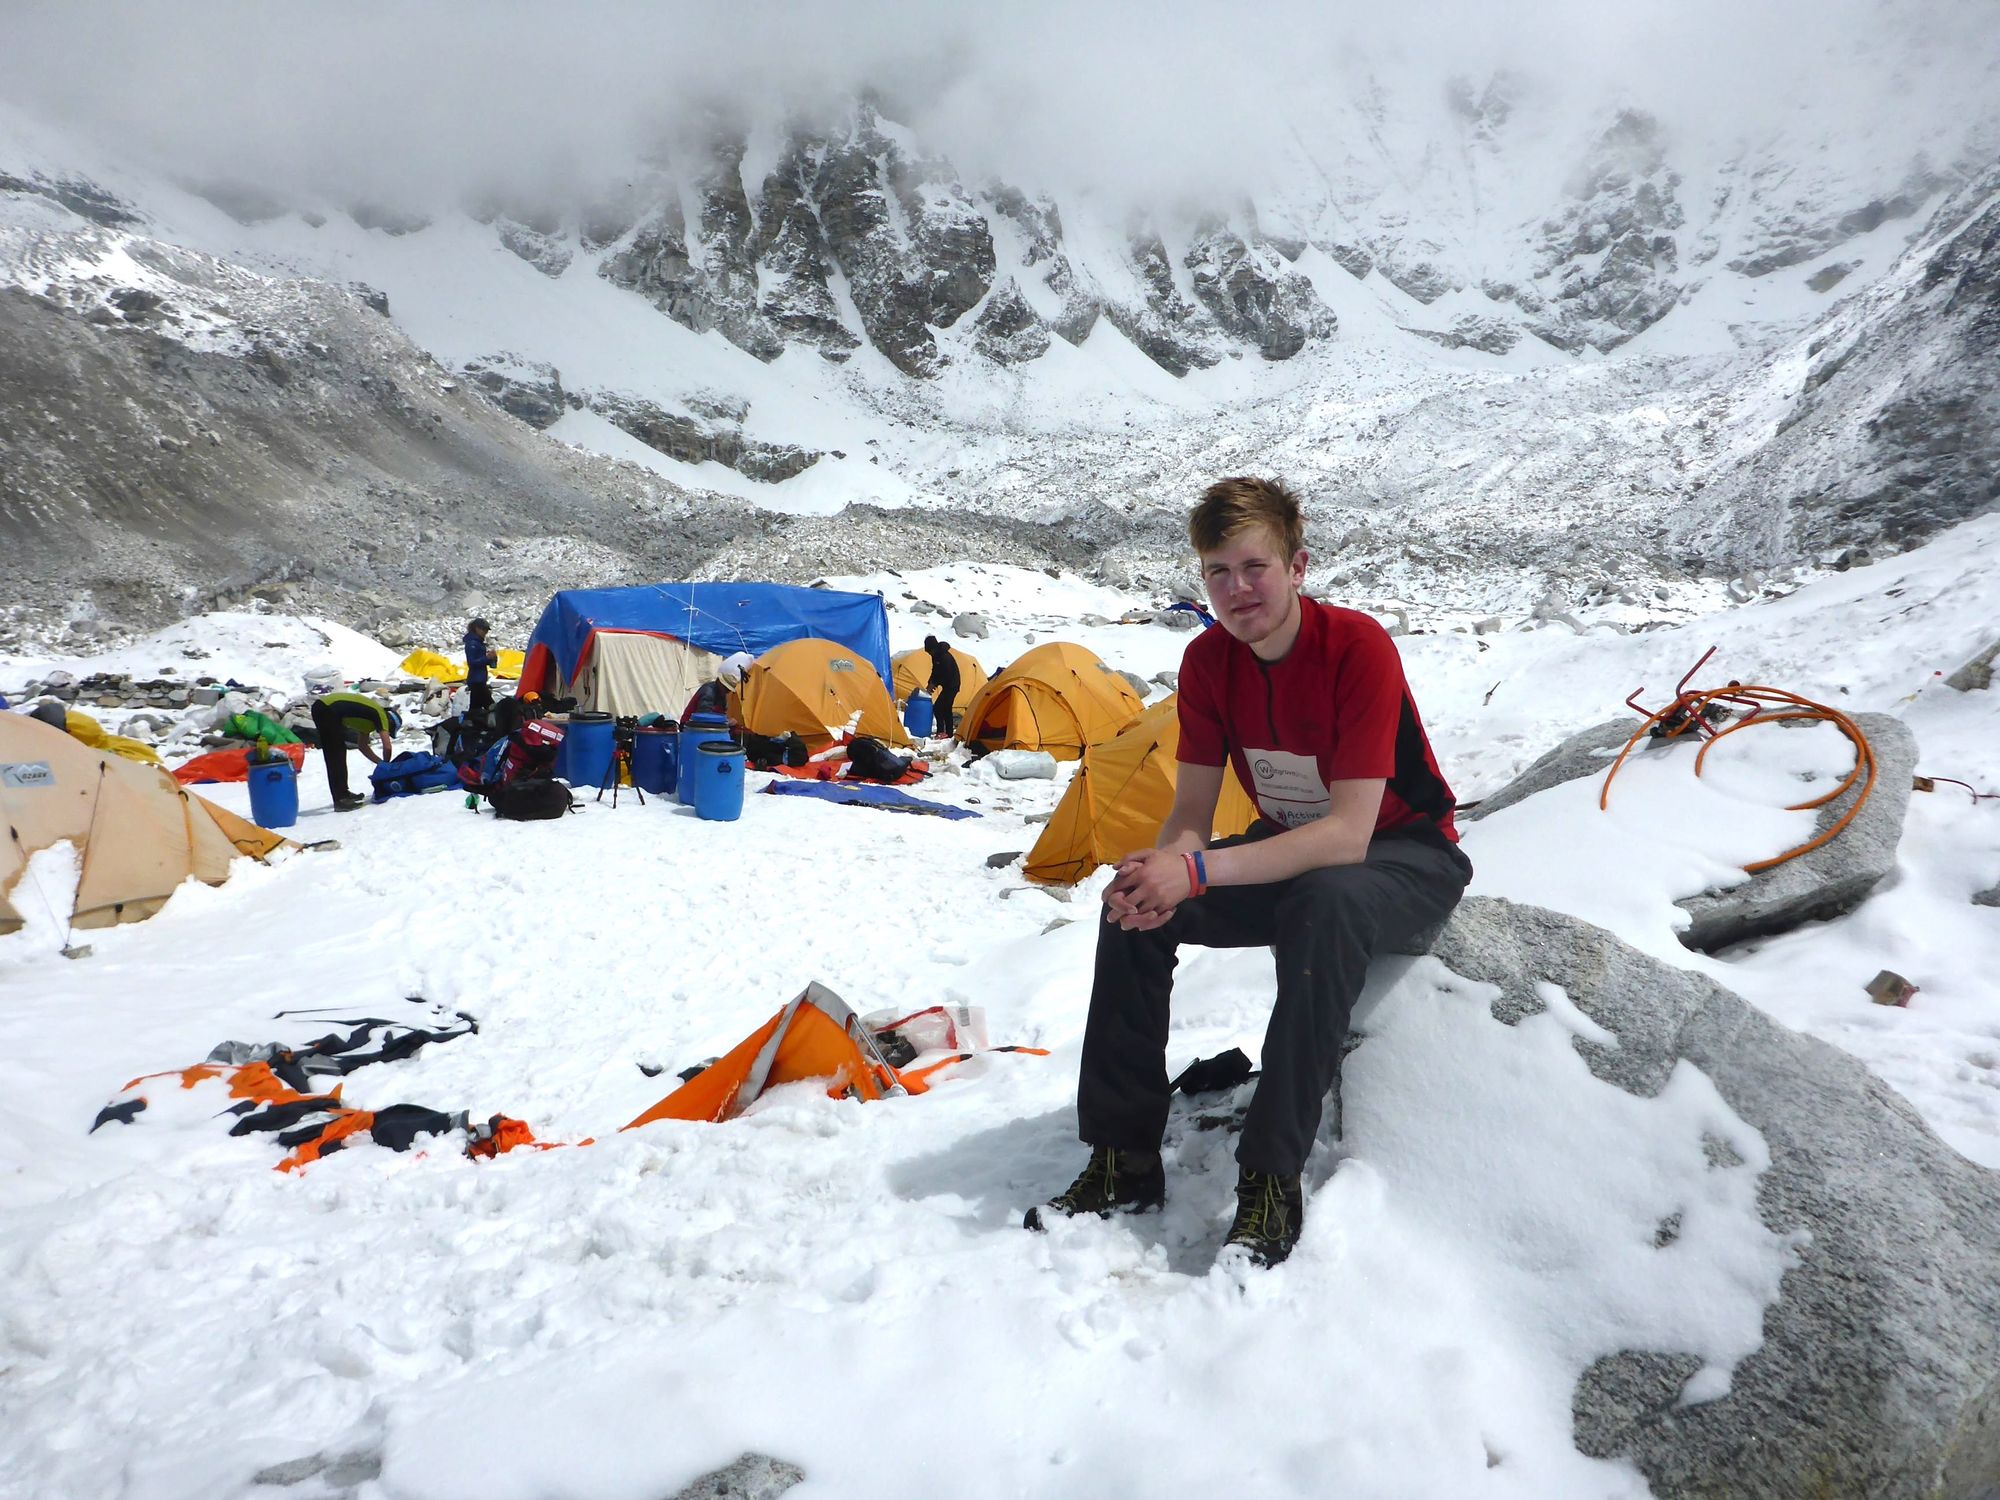 Alex Staniforth at Evrest Base Camp after the avalanche and earthquake in 2015. Photo: Alex Staniforth